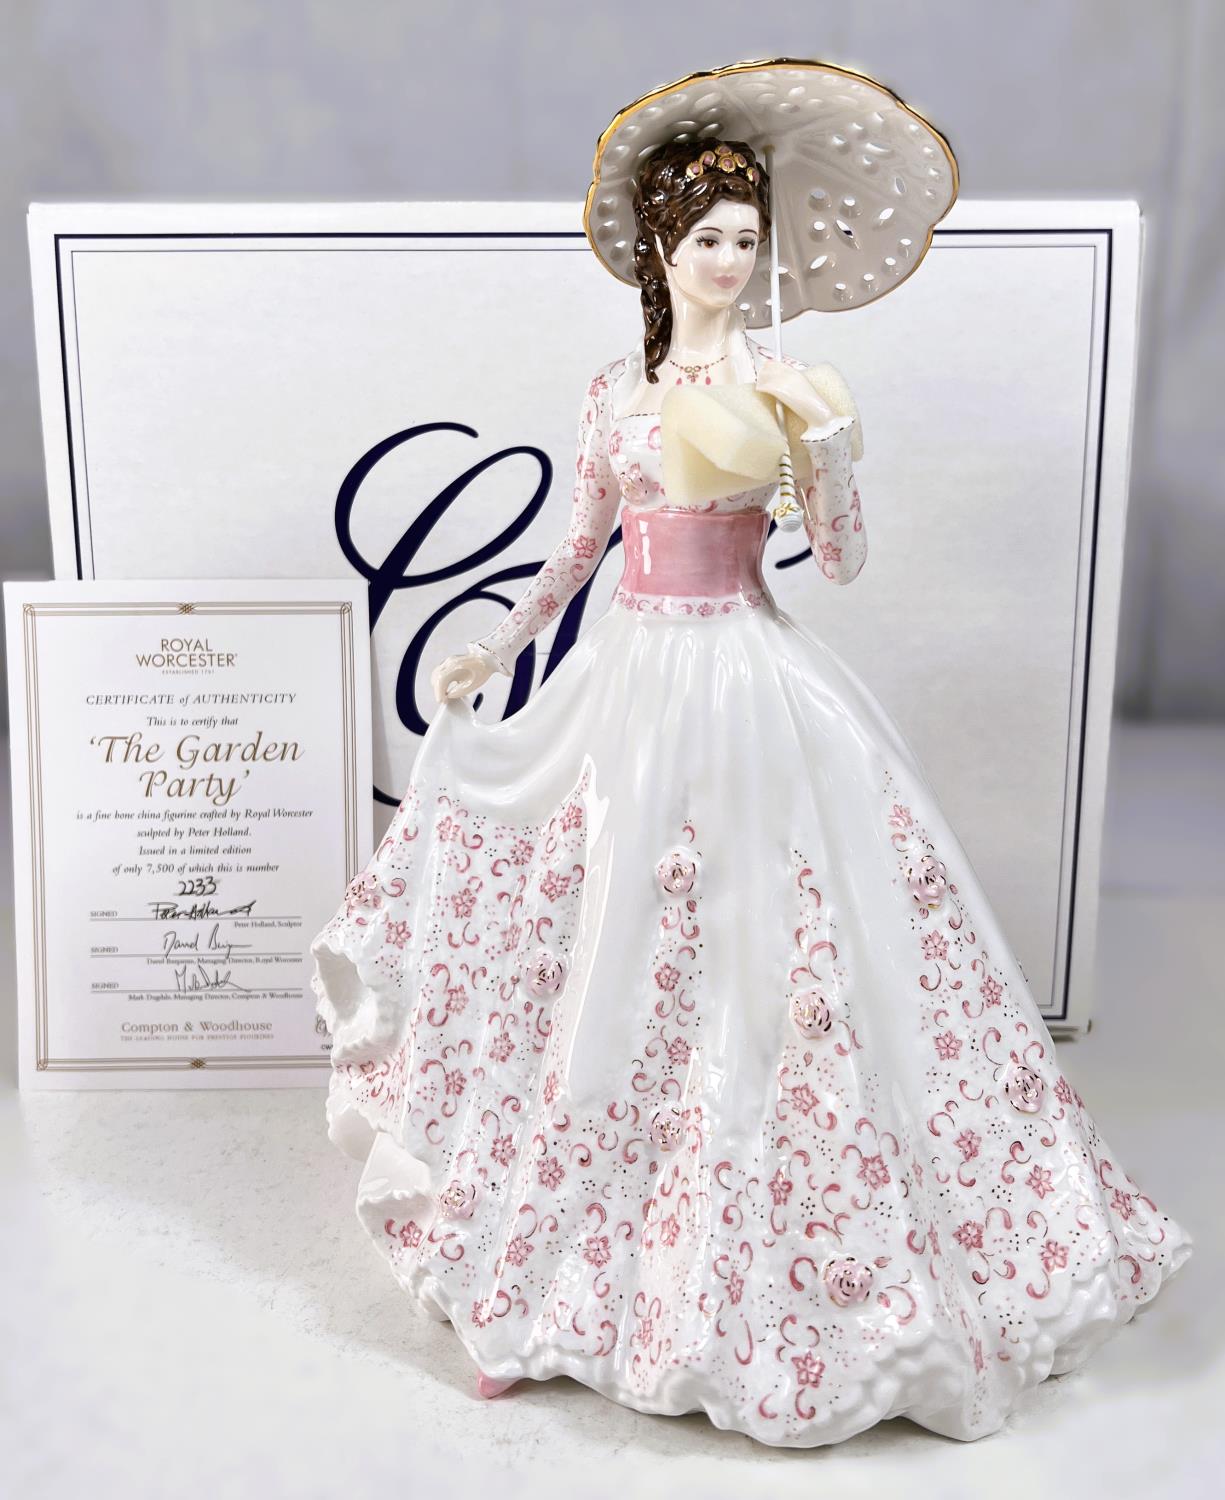 Royal Worcester limited edition Peter Holland sculpted figurine, 'The Garden Party' 2233/7500 with